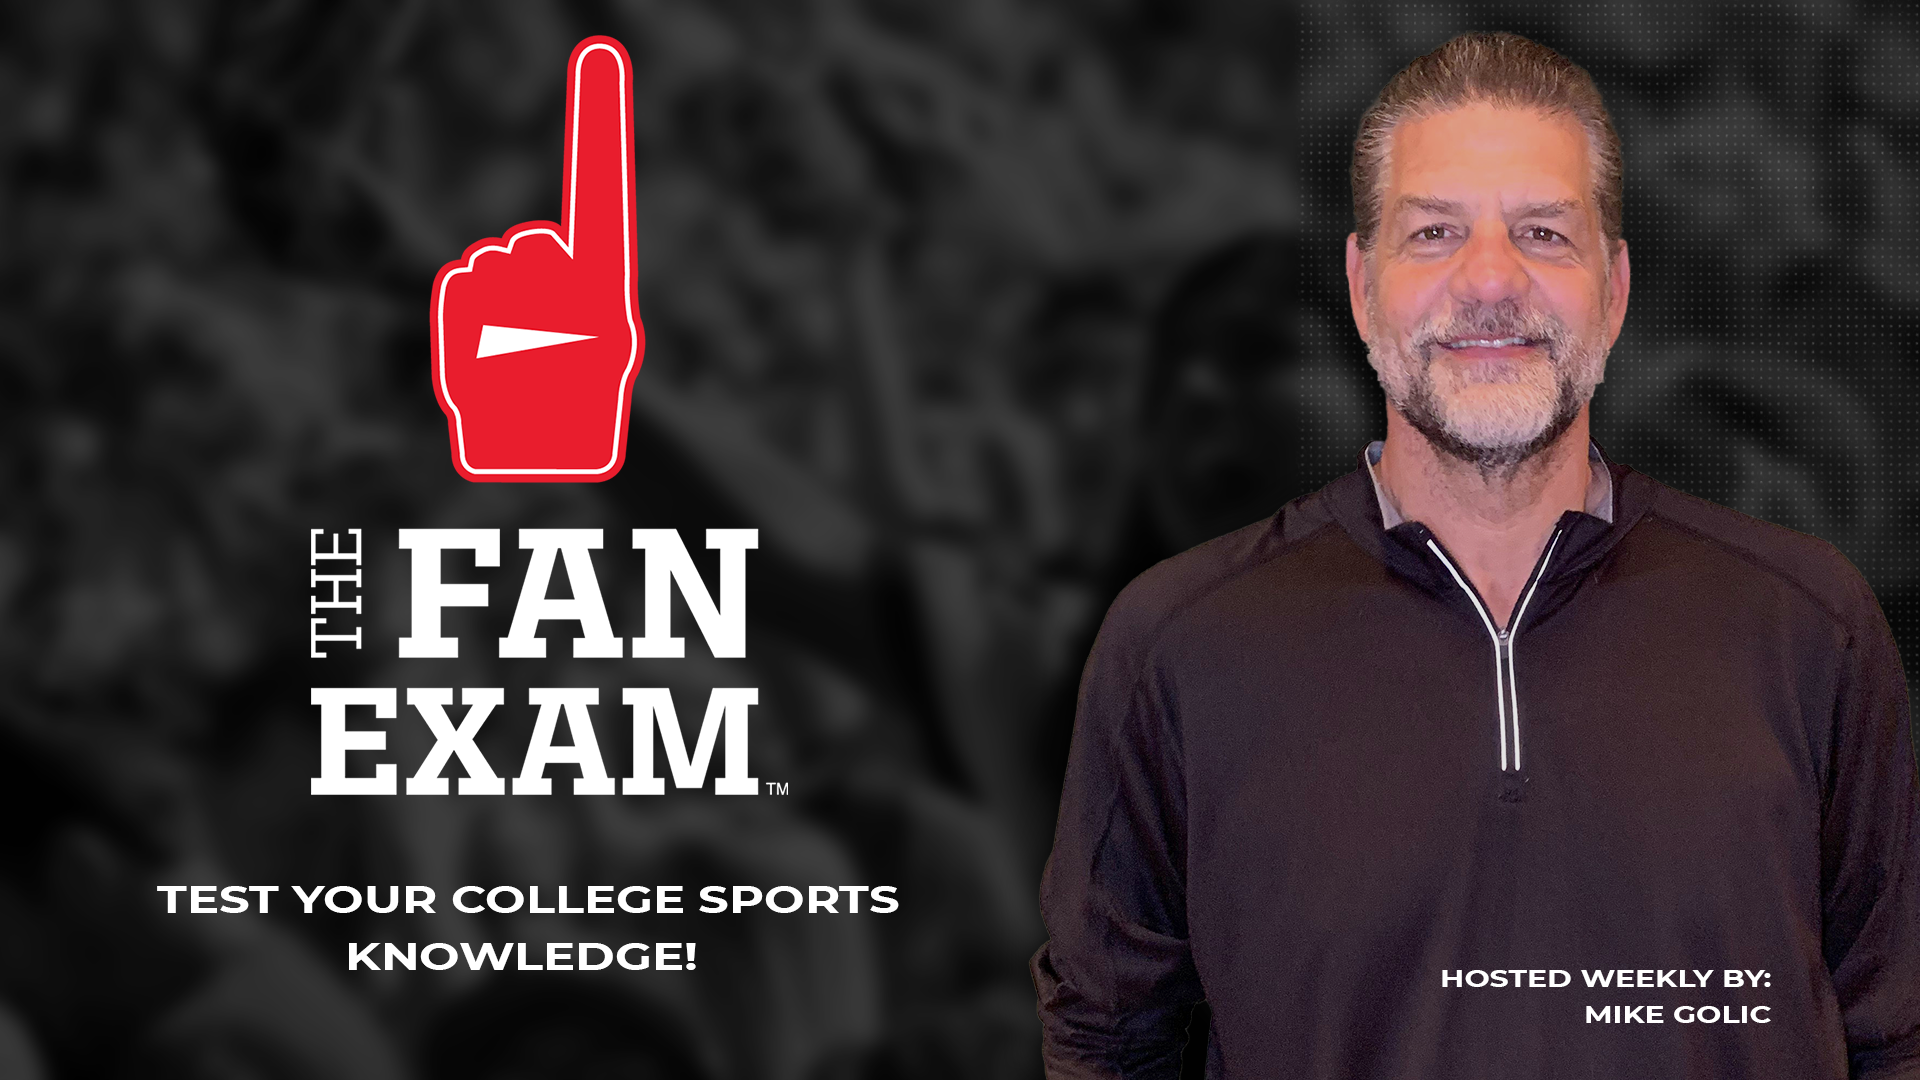 PLAY “THE FAN EXAM” COLLEGE SPORTS TRIVIA LIVE TONIGHT; NEW GAME AT 8 PM ET